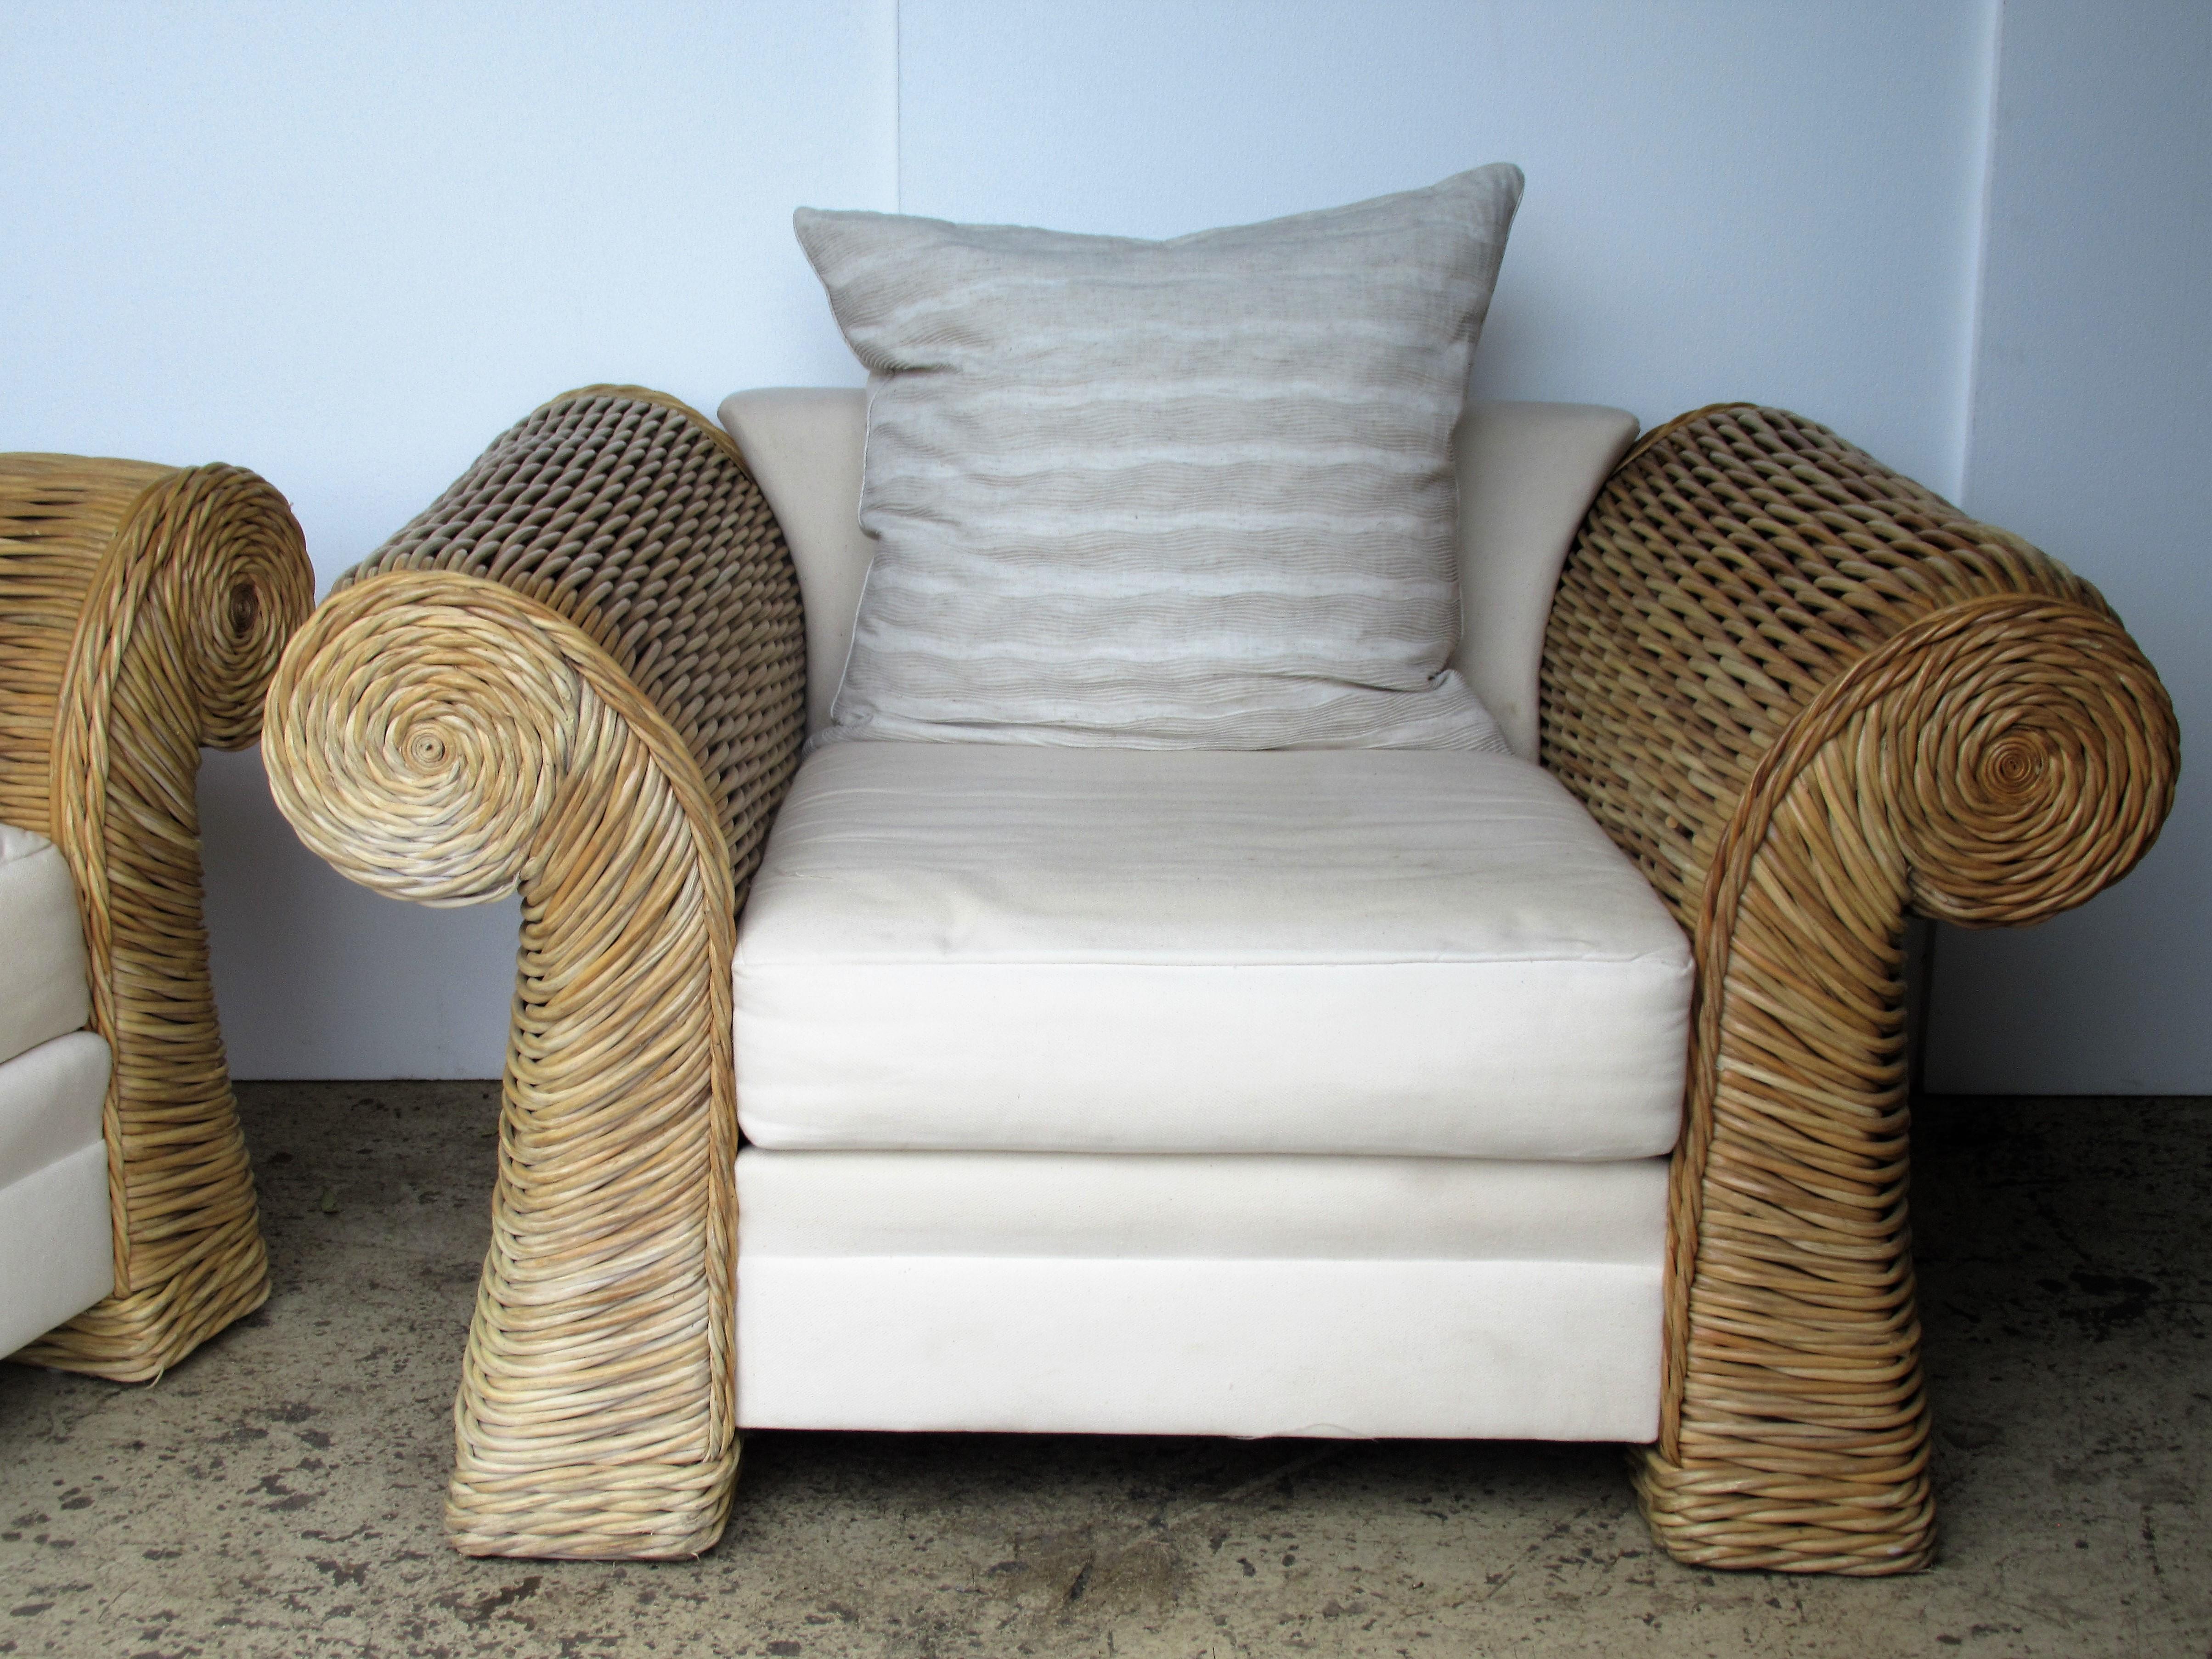 20th Century Oversize Natural Rattan Lounge Chairs by O-Asian Designs, Inc.